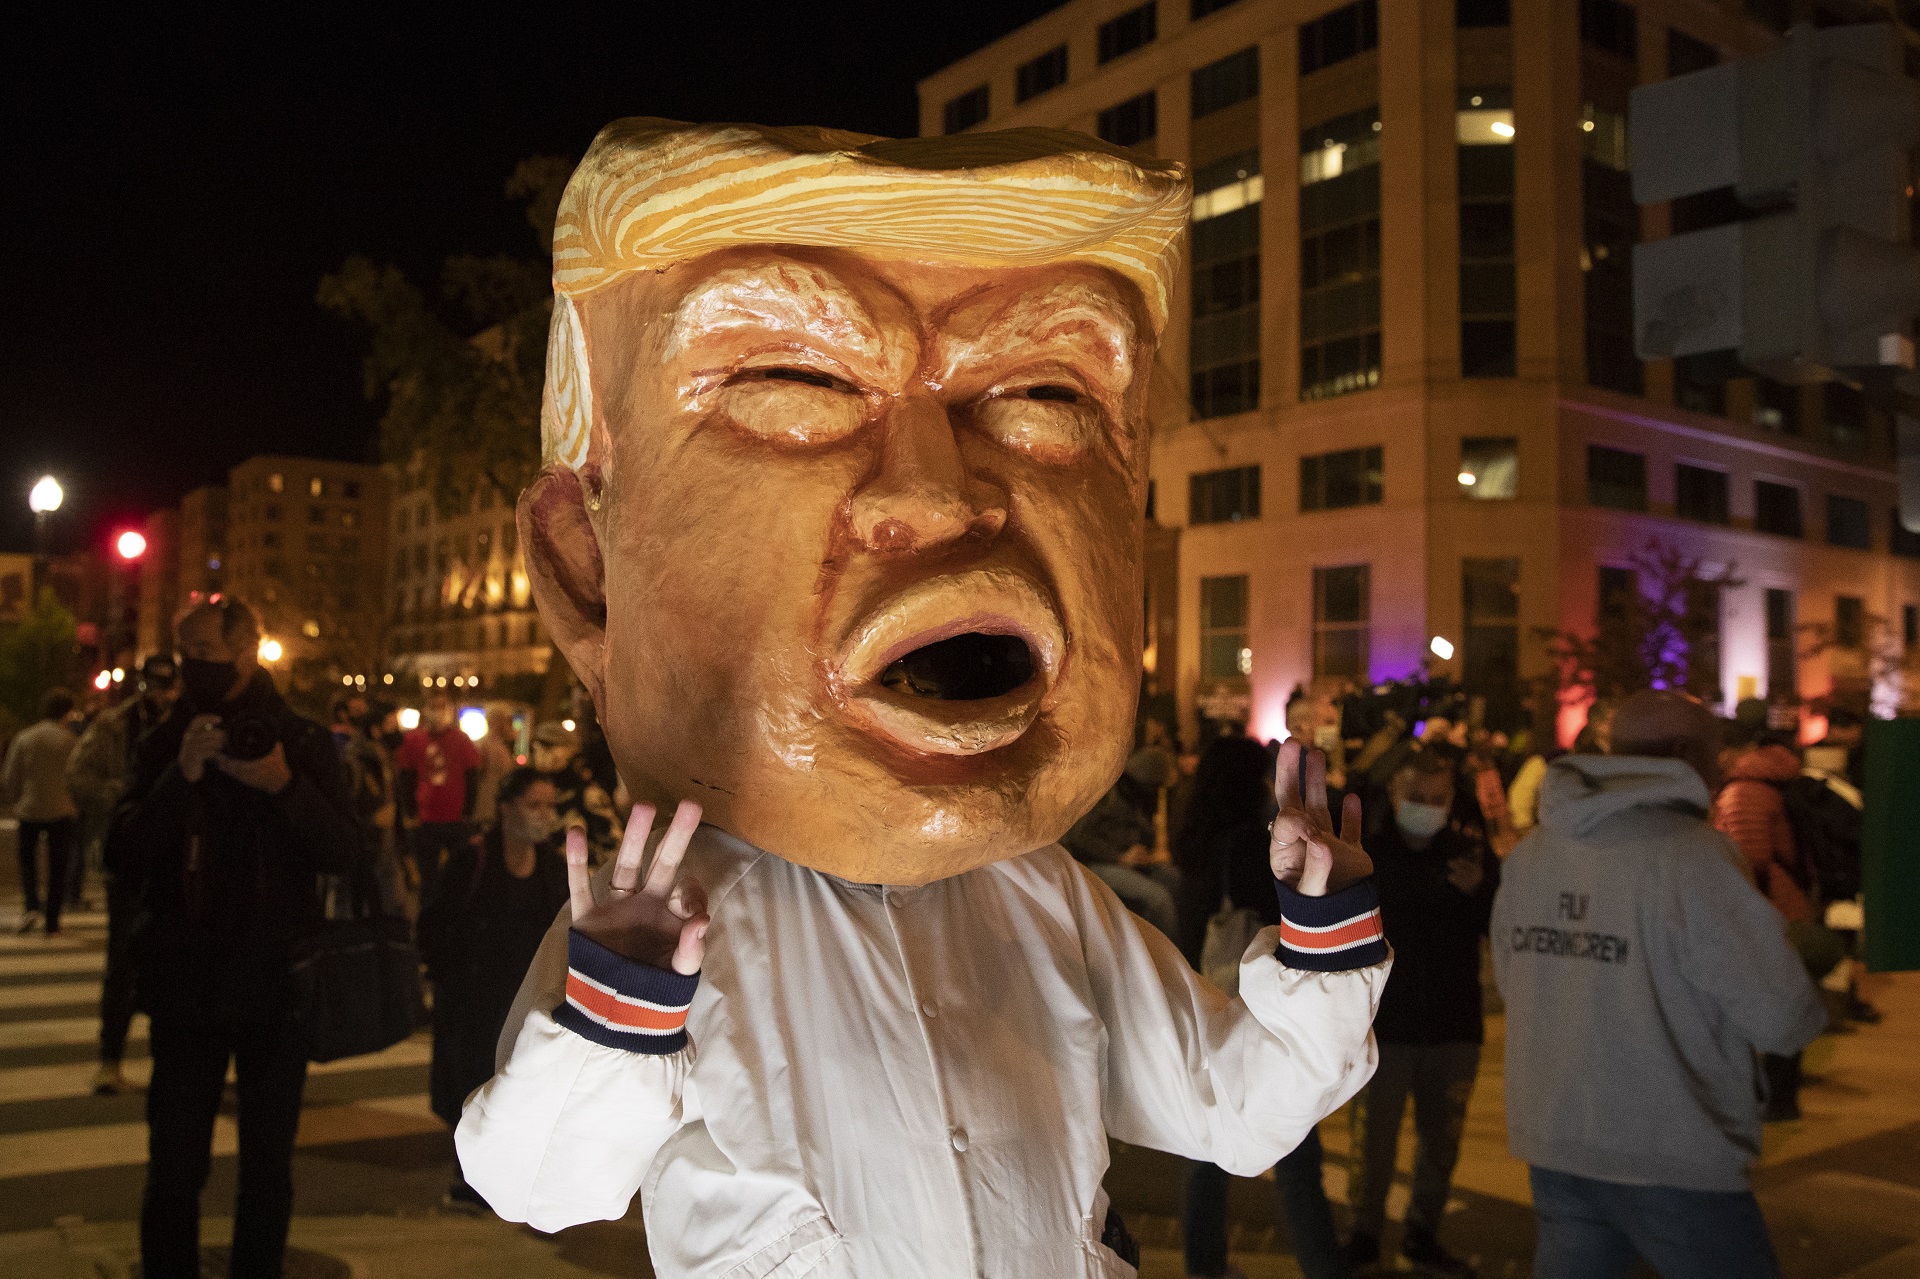 epa08797277 A woman wears a mask depicting US President Donald J. Trump at Black Lives Matter Plaza in Washington, DC, USA, 03 November 2020. Americans vote on Election Day to choose between re-electing Donald J. Trump or electing Joe Biden as the 46th President of the United States to serve from 2021 through 2024.  EPA/MICHAEL REYNOLDS